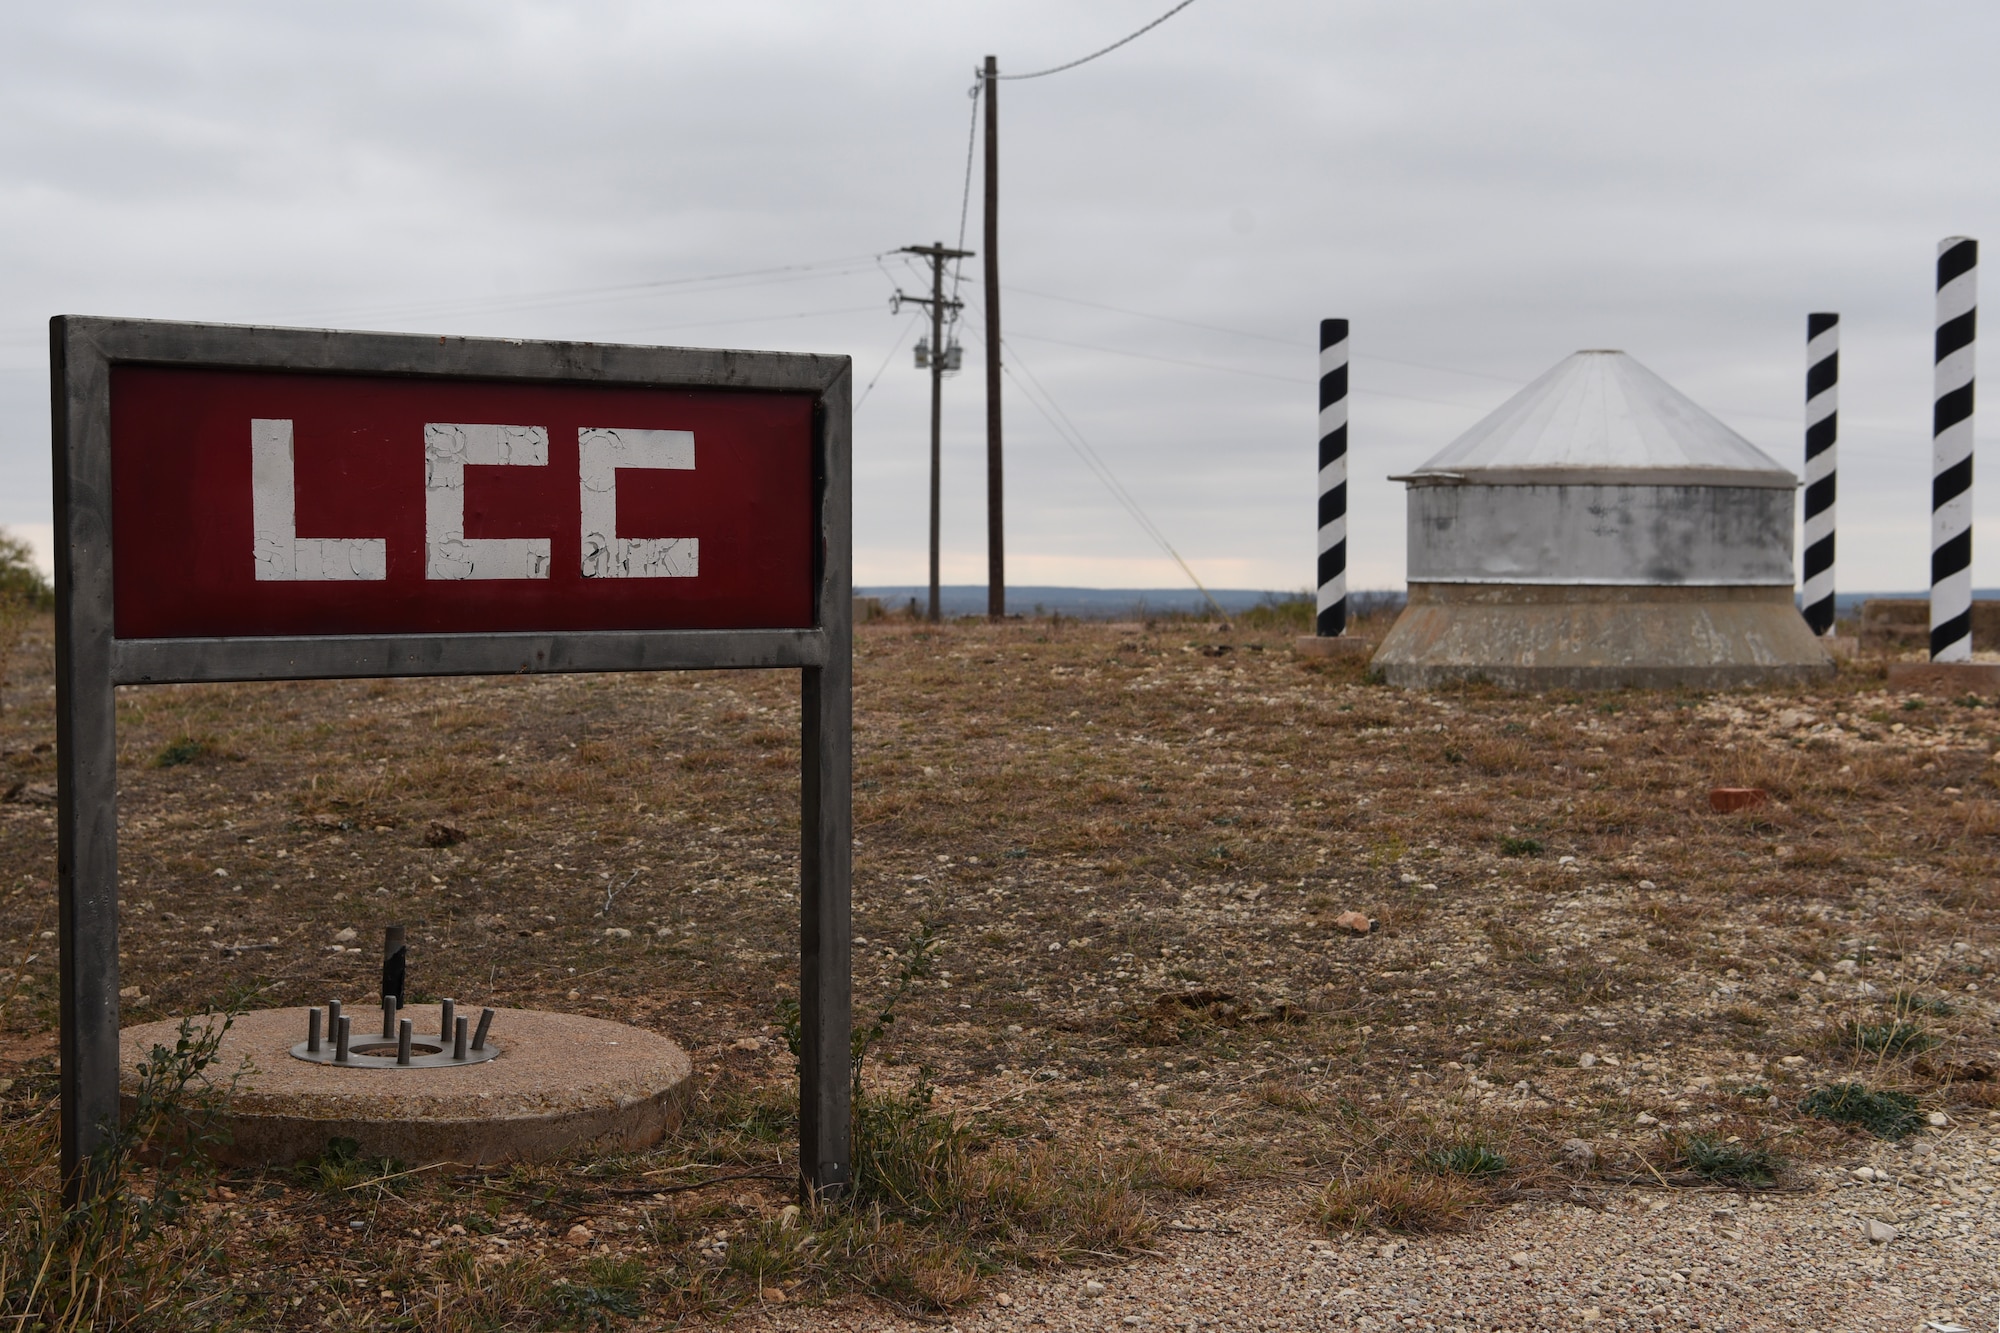 The above ground view of the launch control center’s access point at Lawn Atlas Missile Base’s missile silo in Lawn, Texas, Dec. 3, 2020. The entryway provided access, while support personnel and equipment were housed in two quonset huts for Atlas intercontinental ballistic missile F series during the Cold War in 1962. (U.S. Air Force photo by Senior Airman Abbey Rieves)